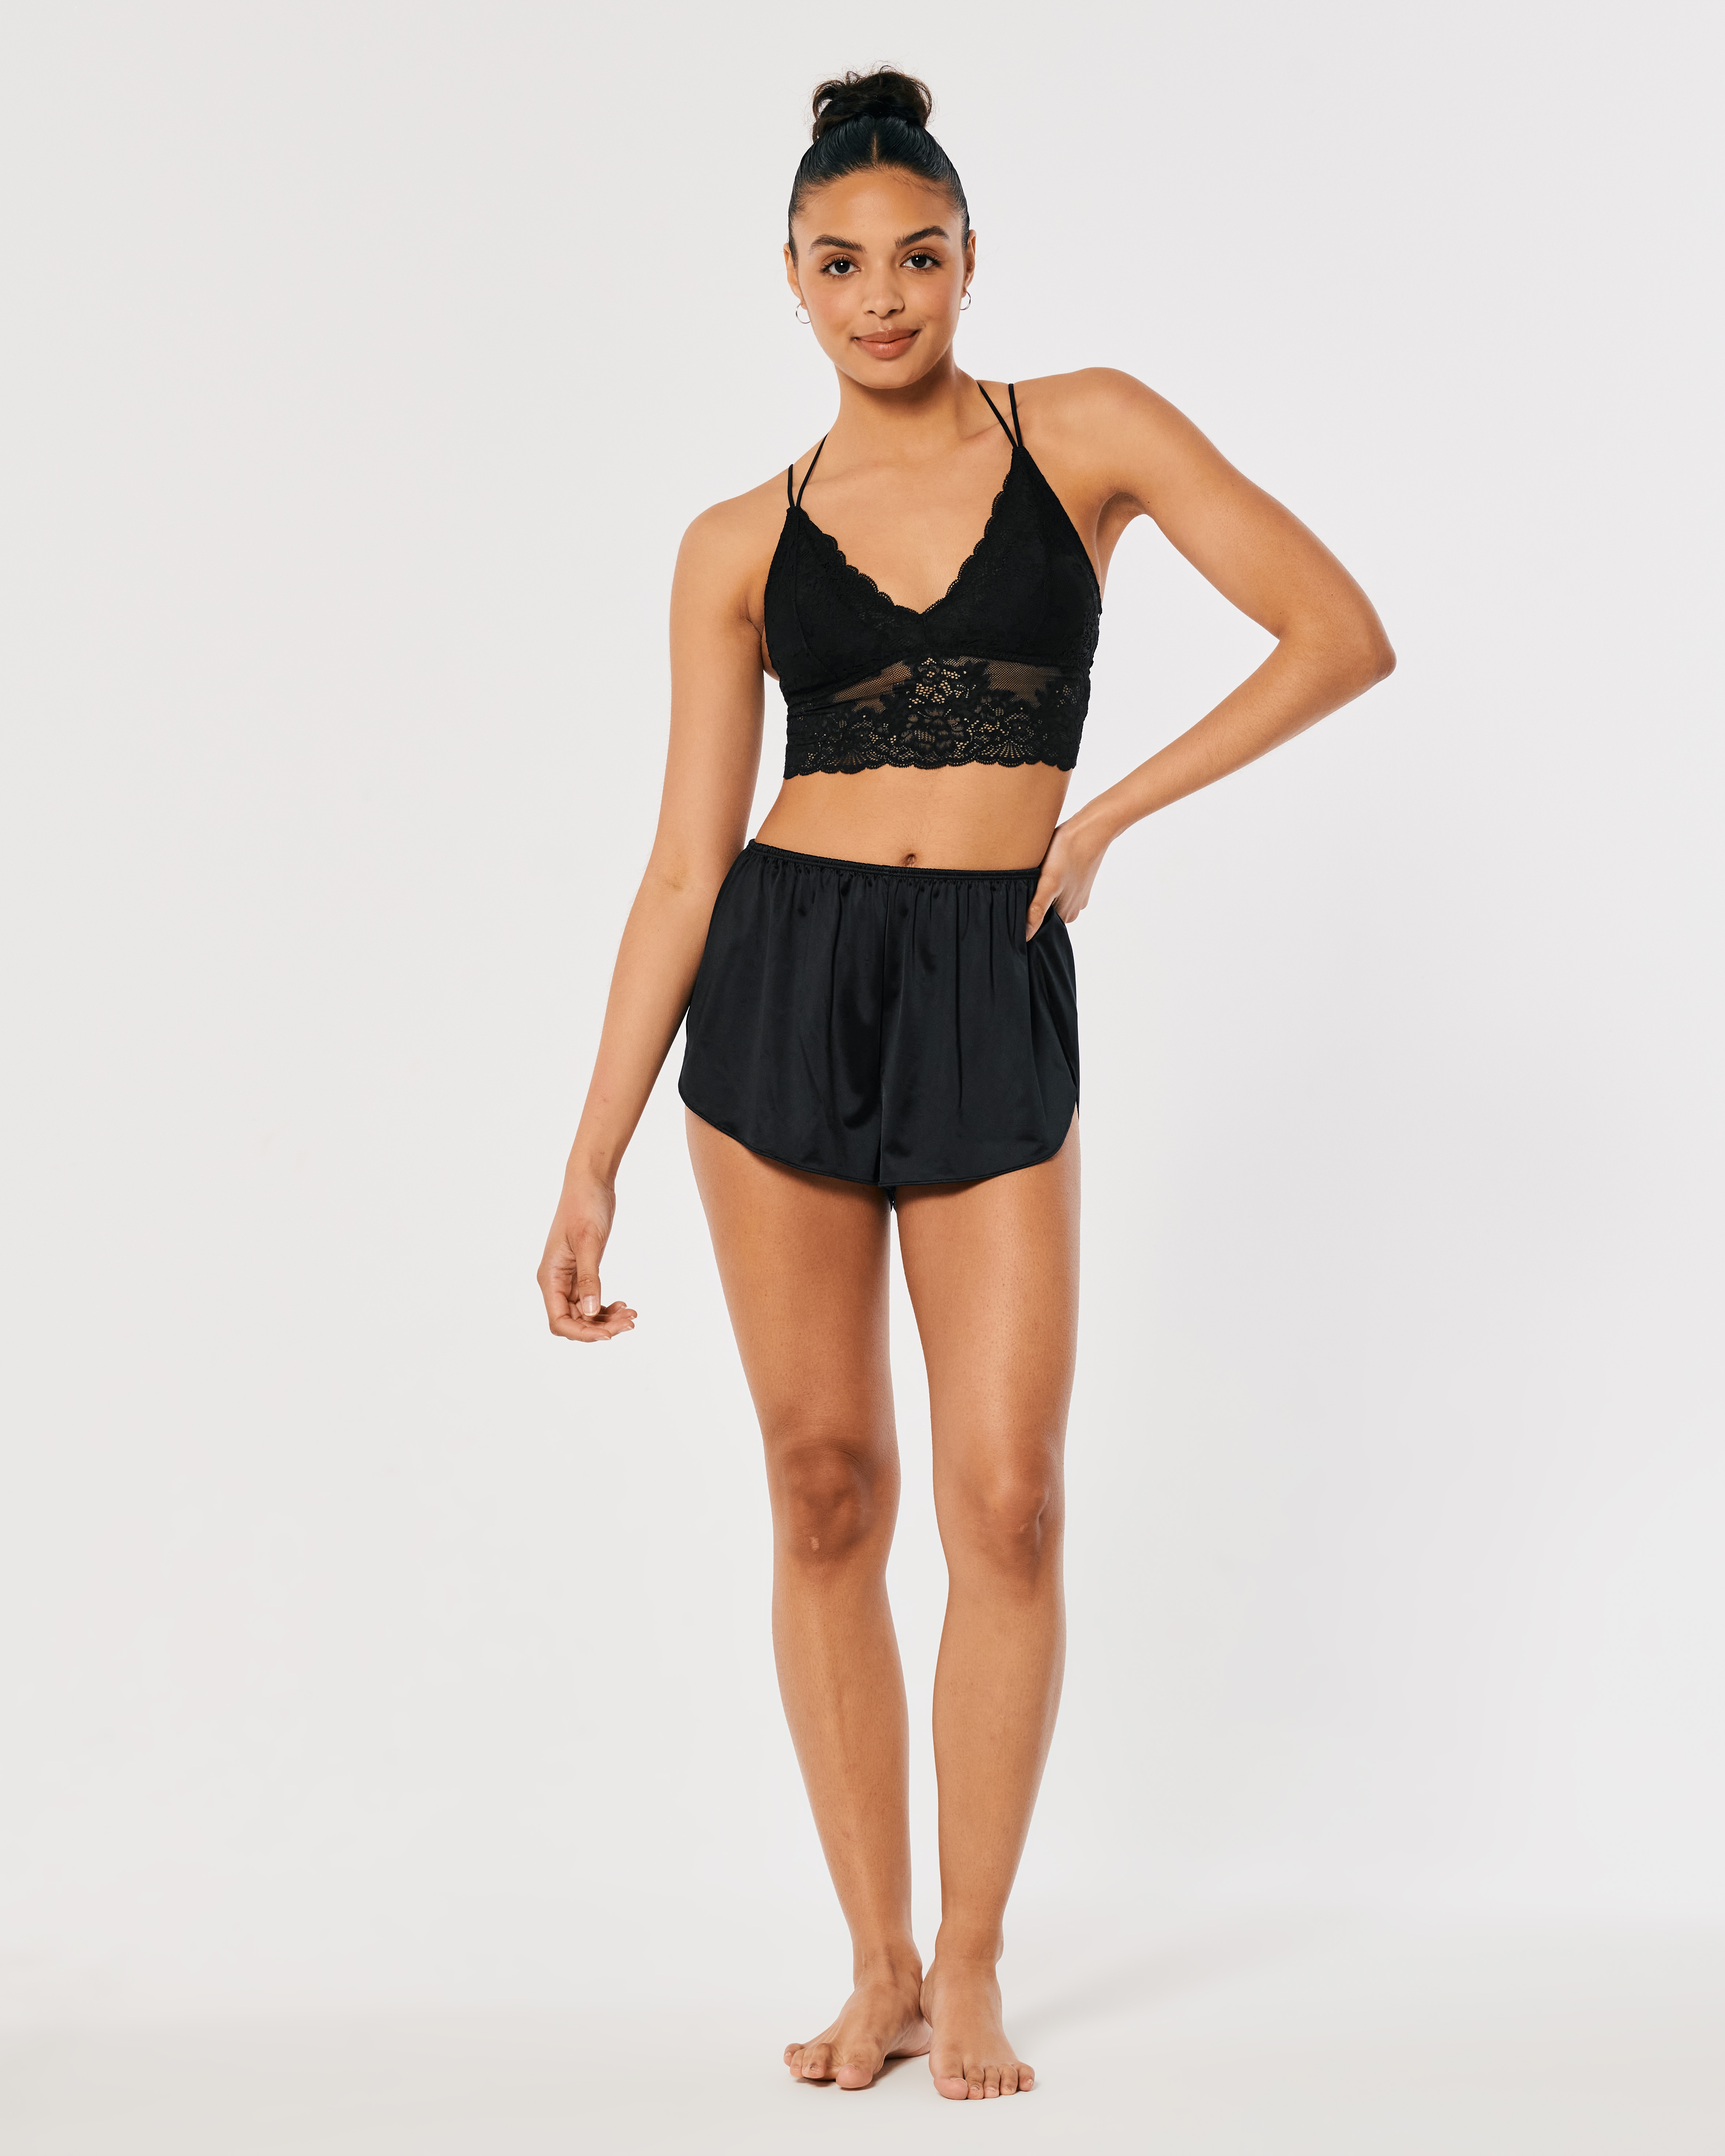 Gilly Hicks, Intimates & Sleepwear, Gilly Hicks Lace Bralette